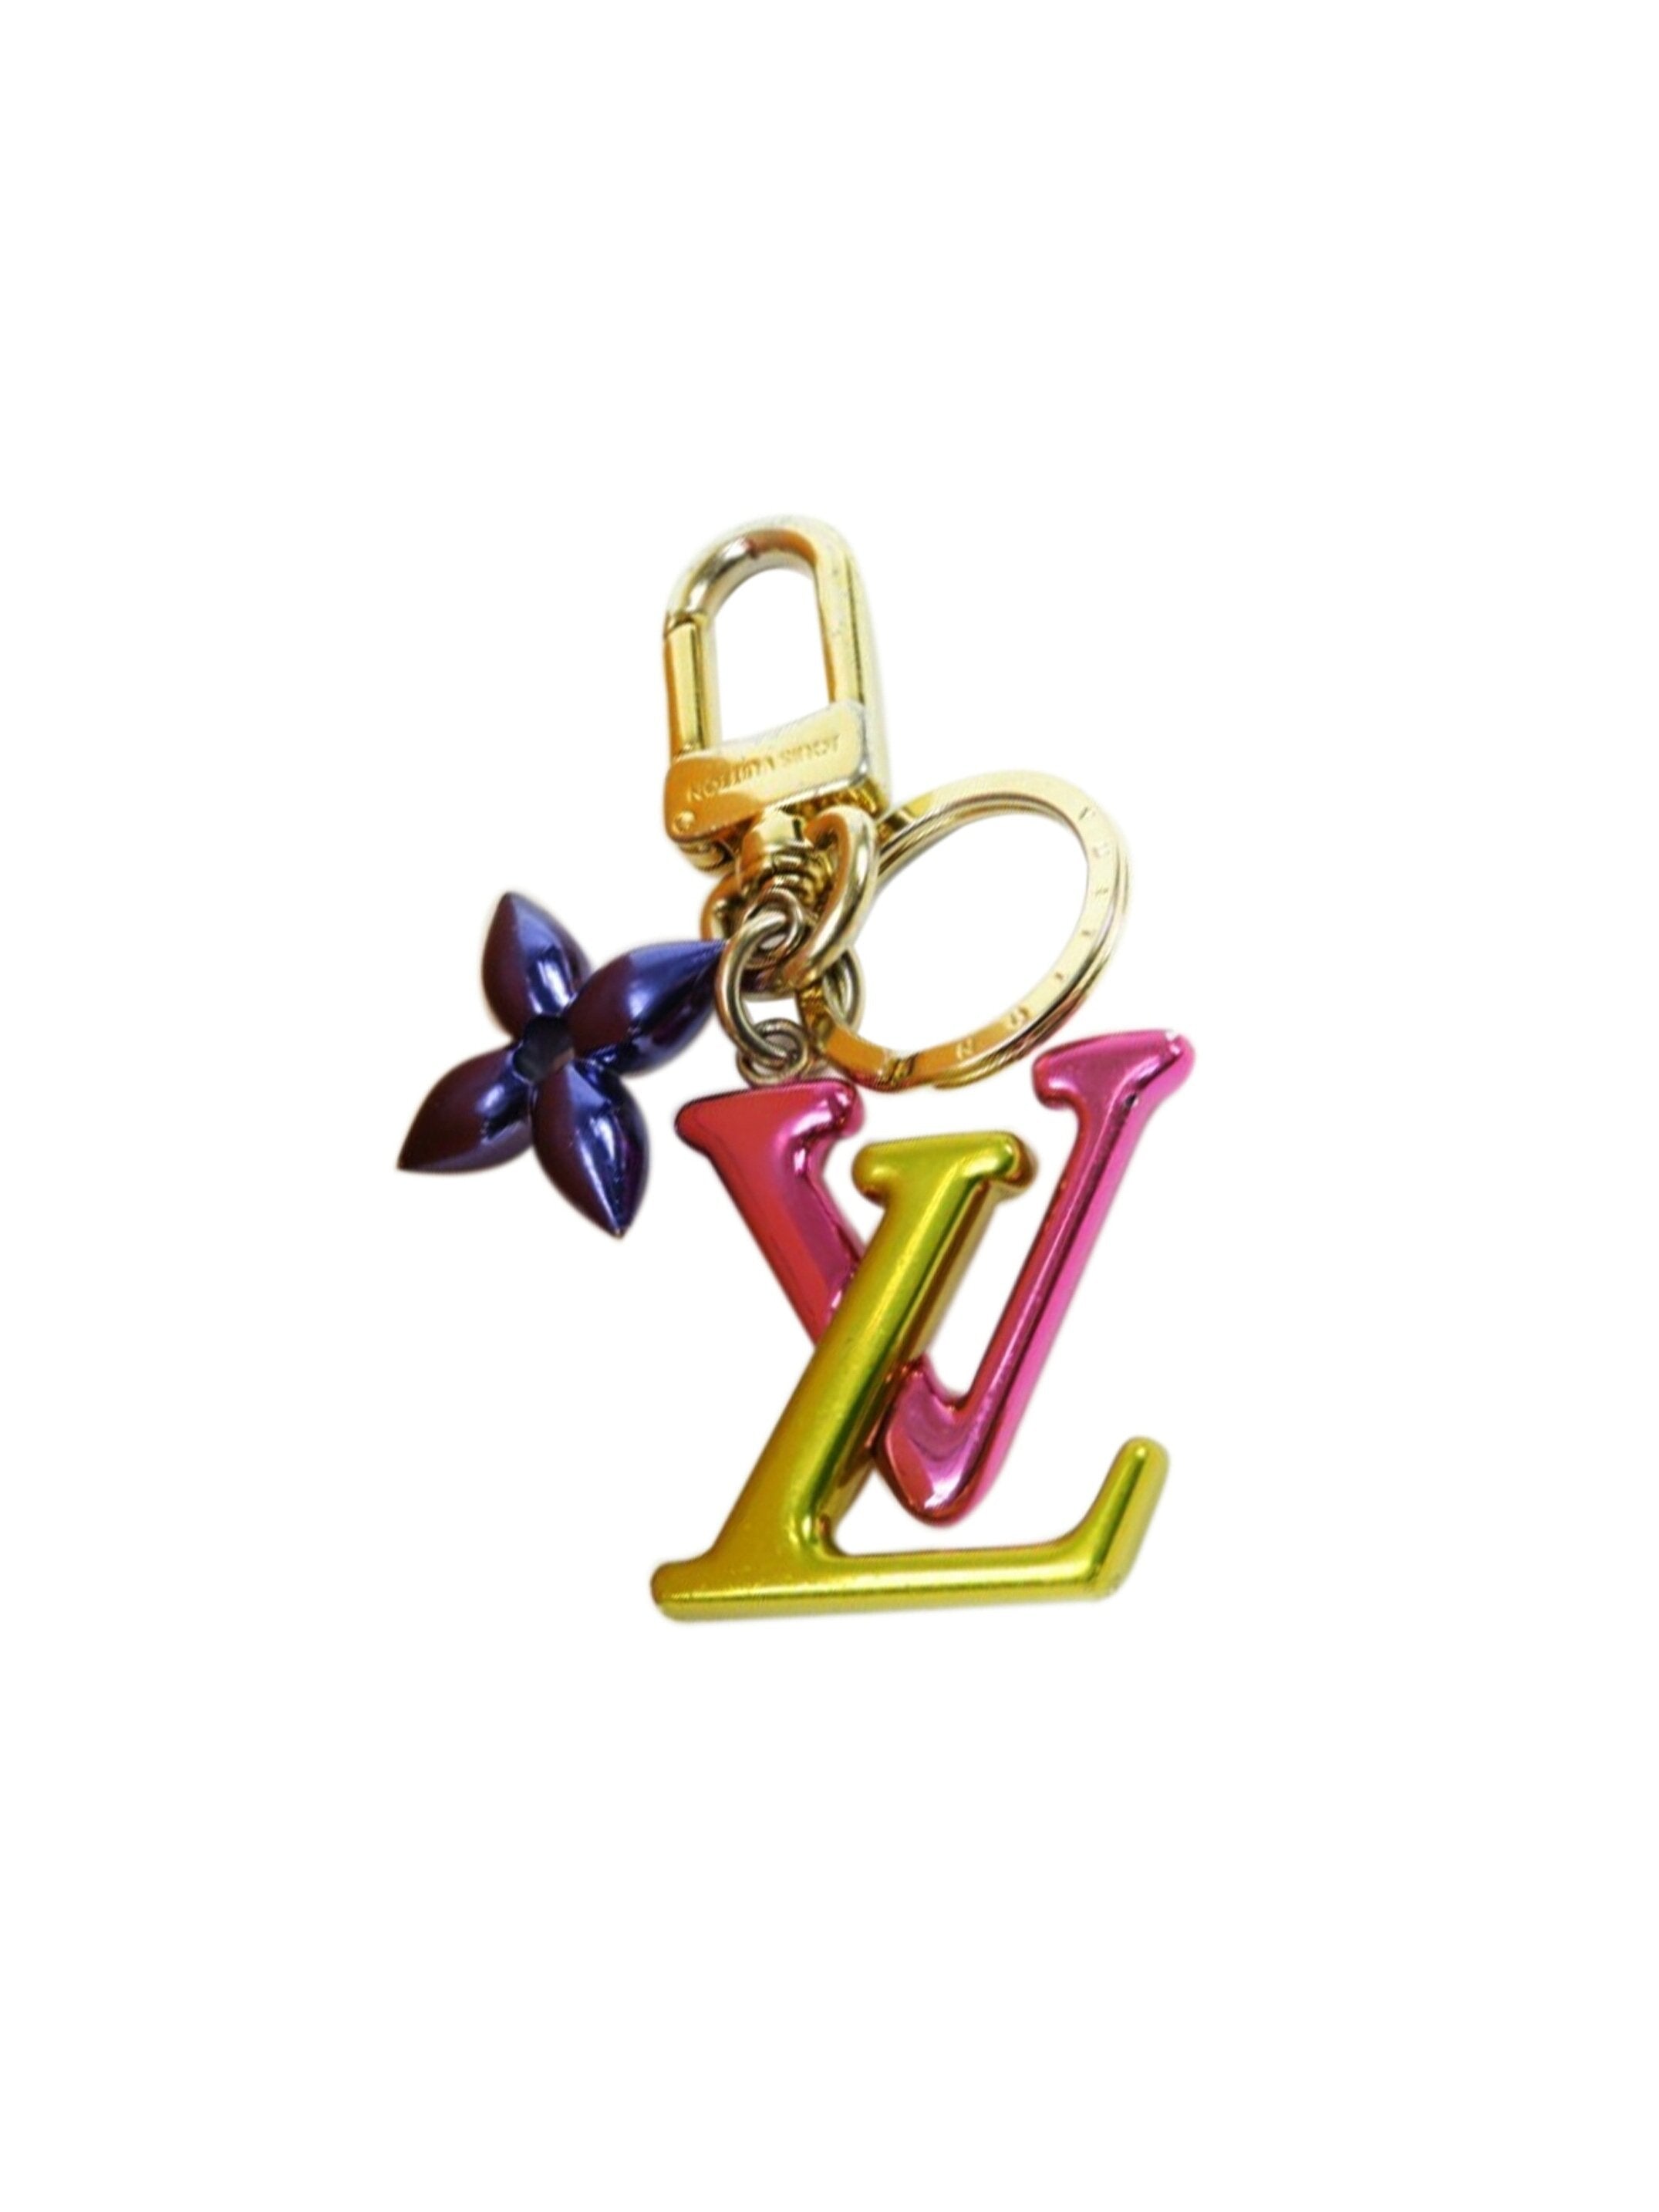 NEW LOUIS VUITTON Yellow Green FLOWER Keychain Bag Charm from Neverfull